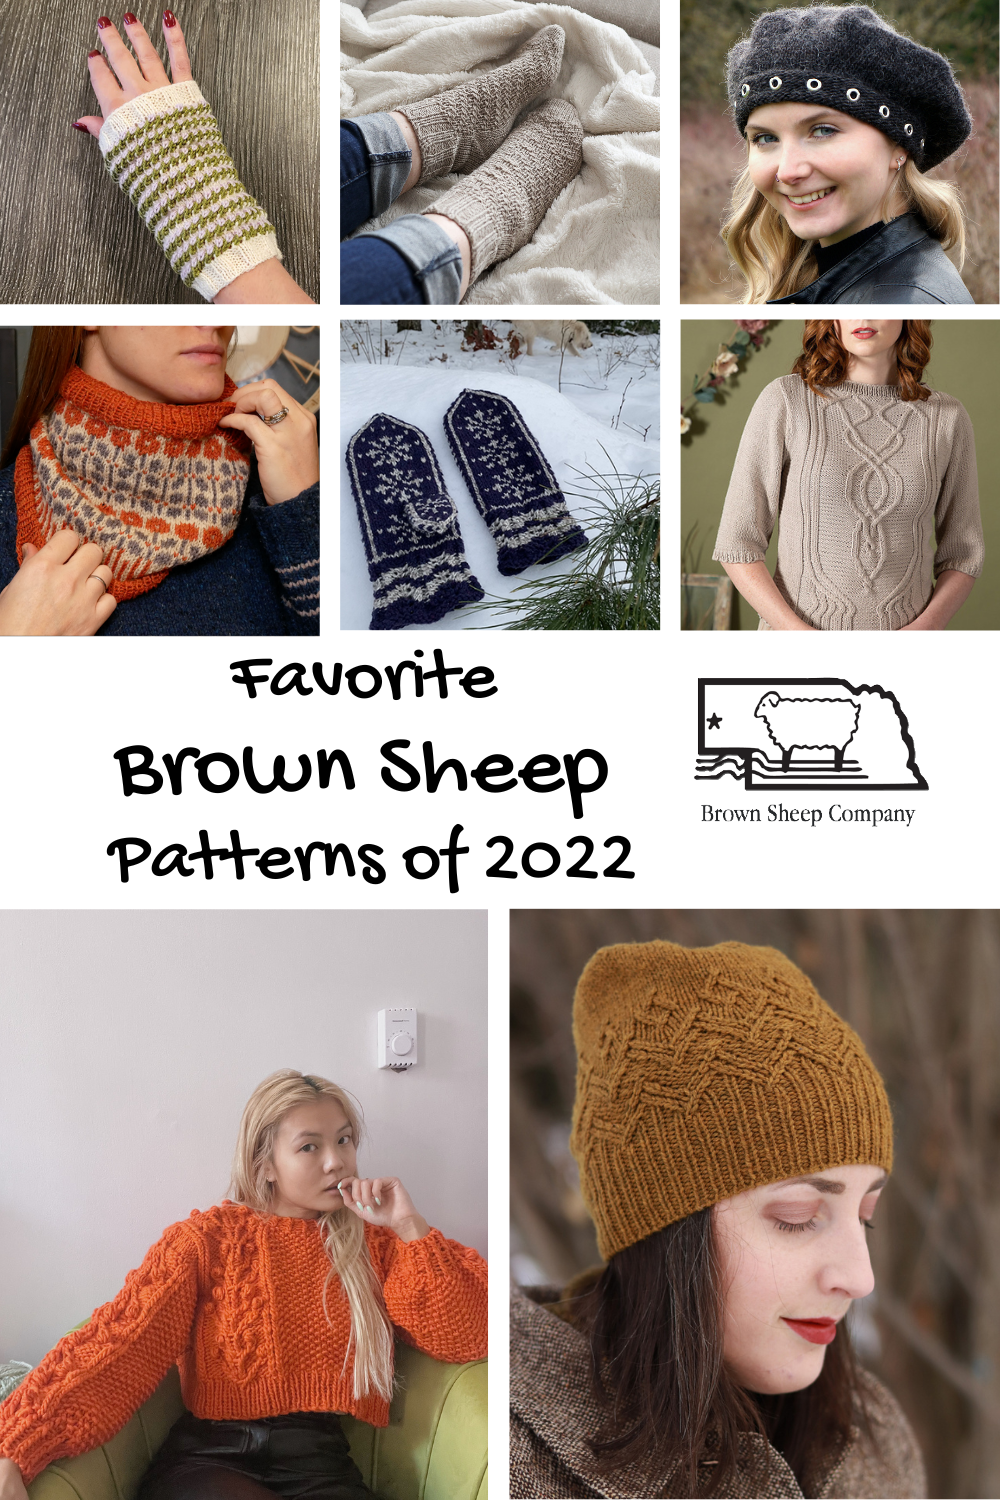 A selection of Brown Sheep patterns from 2022